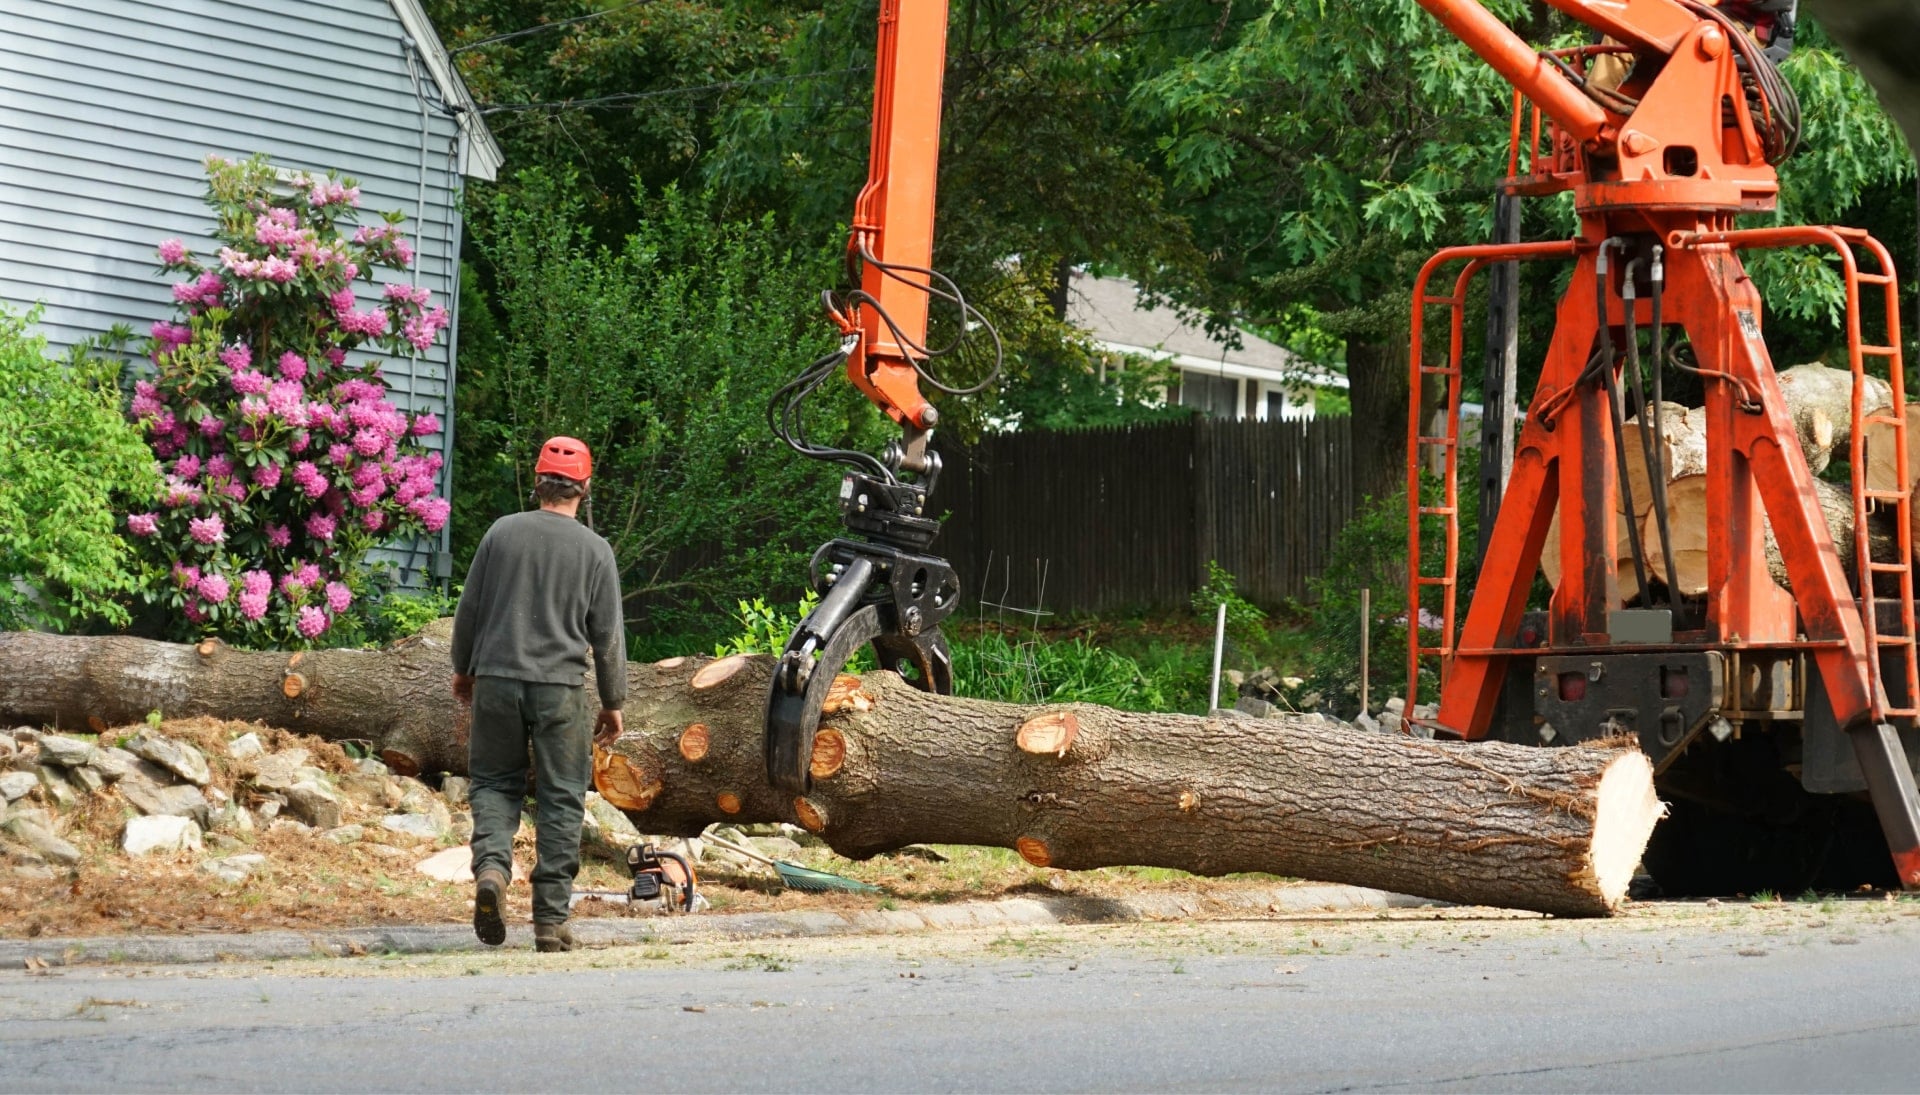 Local partner for Tree removal services in Plano